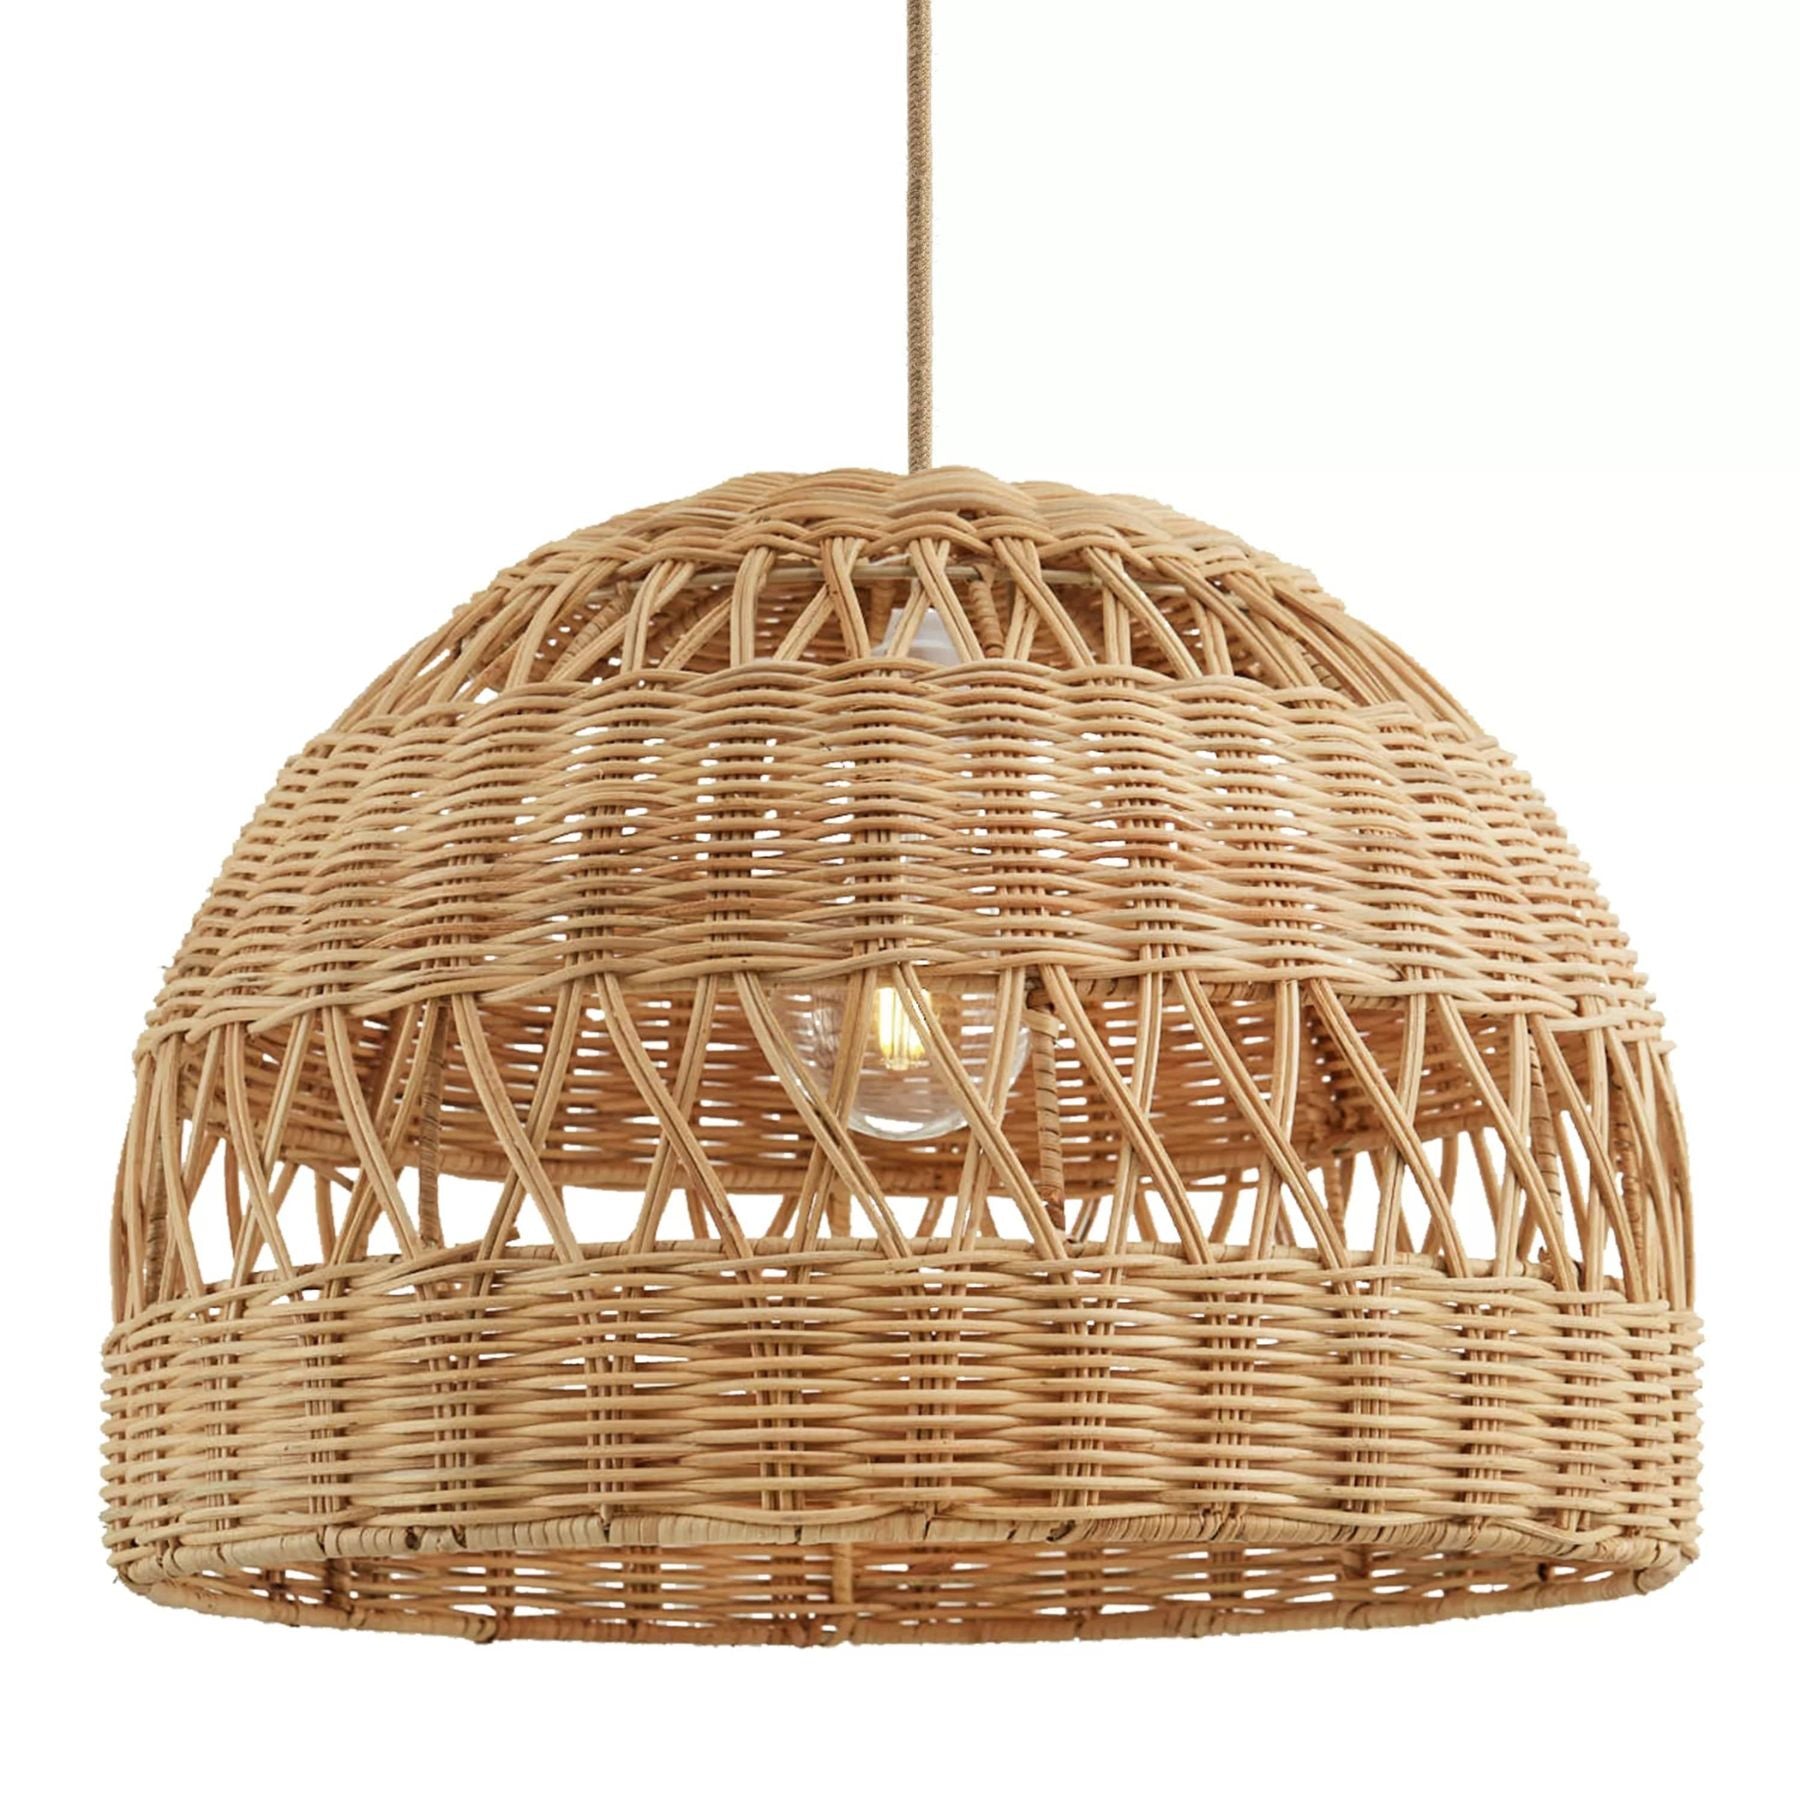 radiant rattan chandelier with a popular dome shape interwoven among the dense lines are delicate x shaped weaves adding simplicity and sophistication